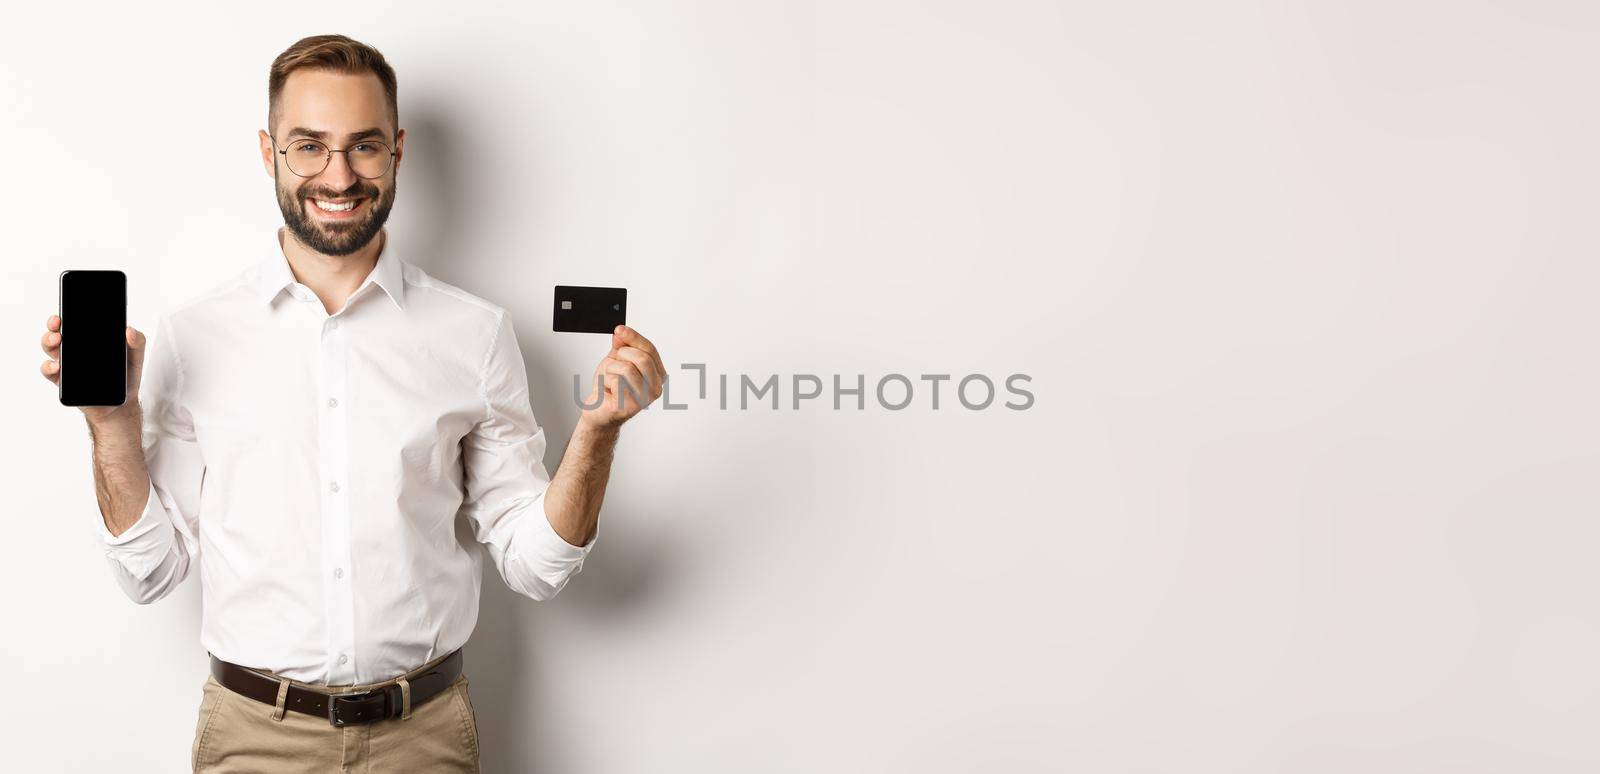 Business and online payment. Smiling handsome man showing mobile screen and credit card, standing over white background.